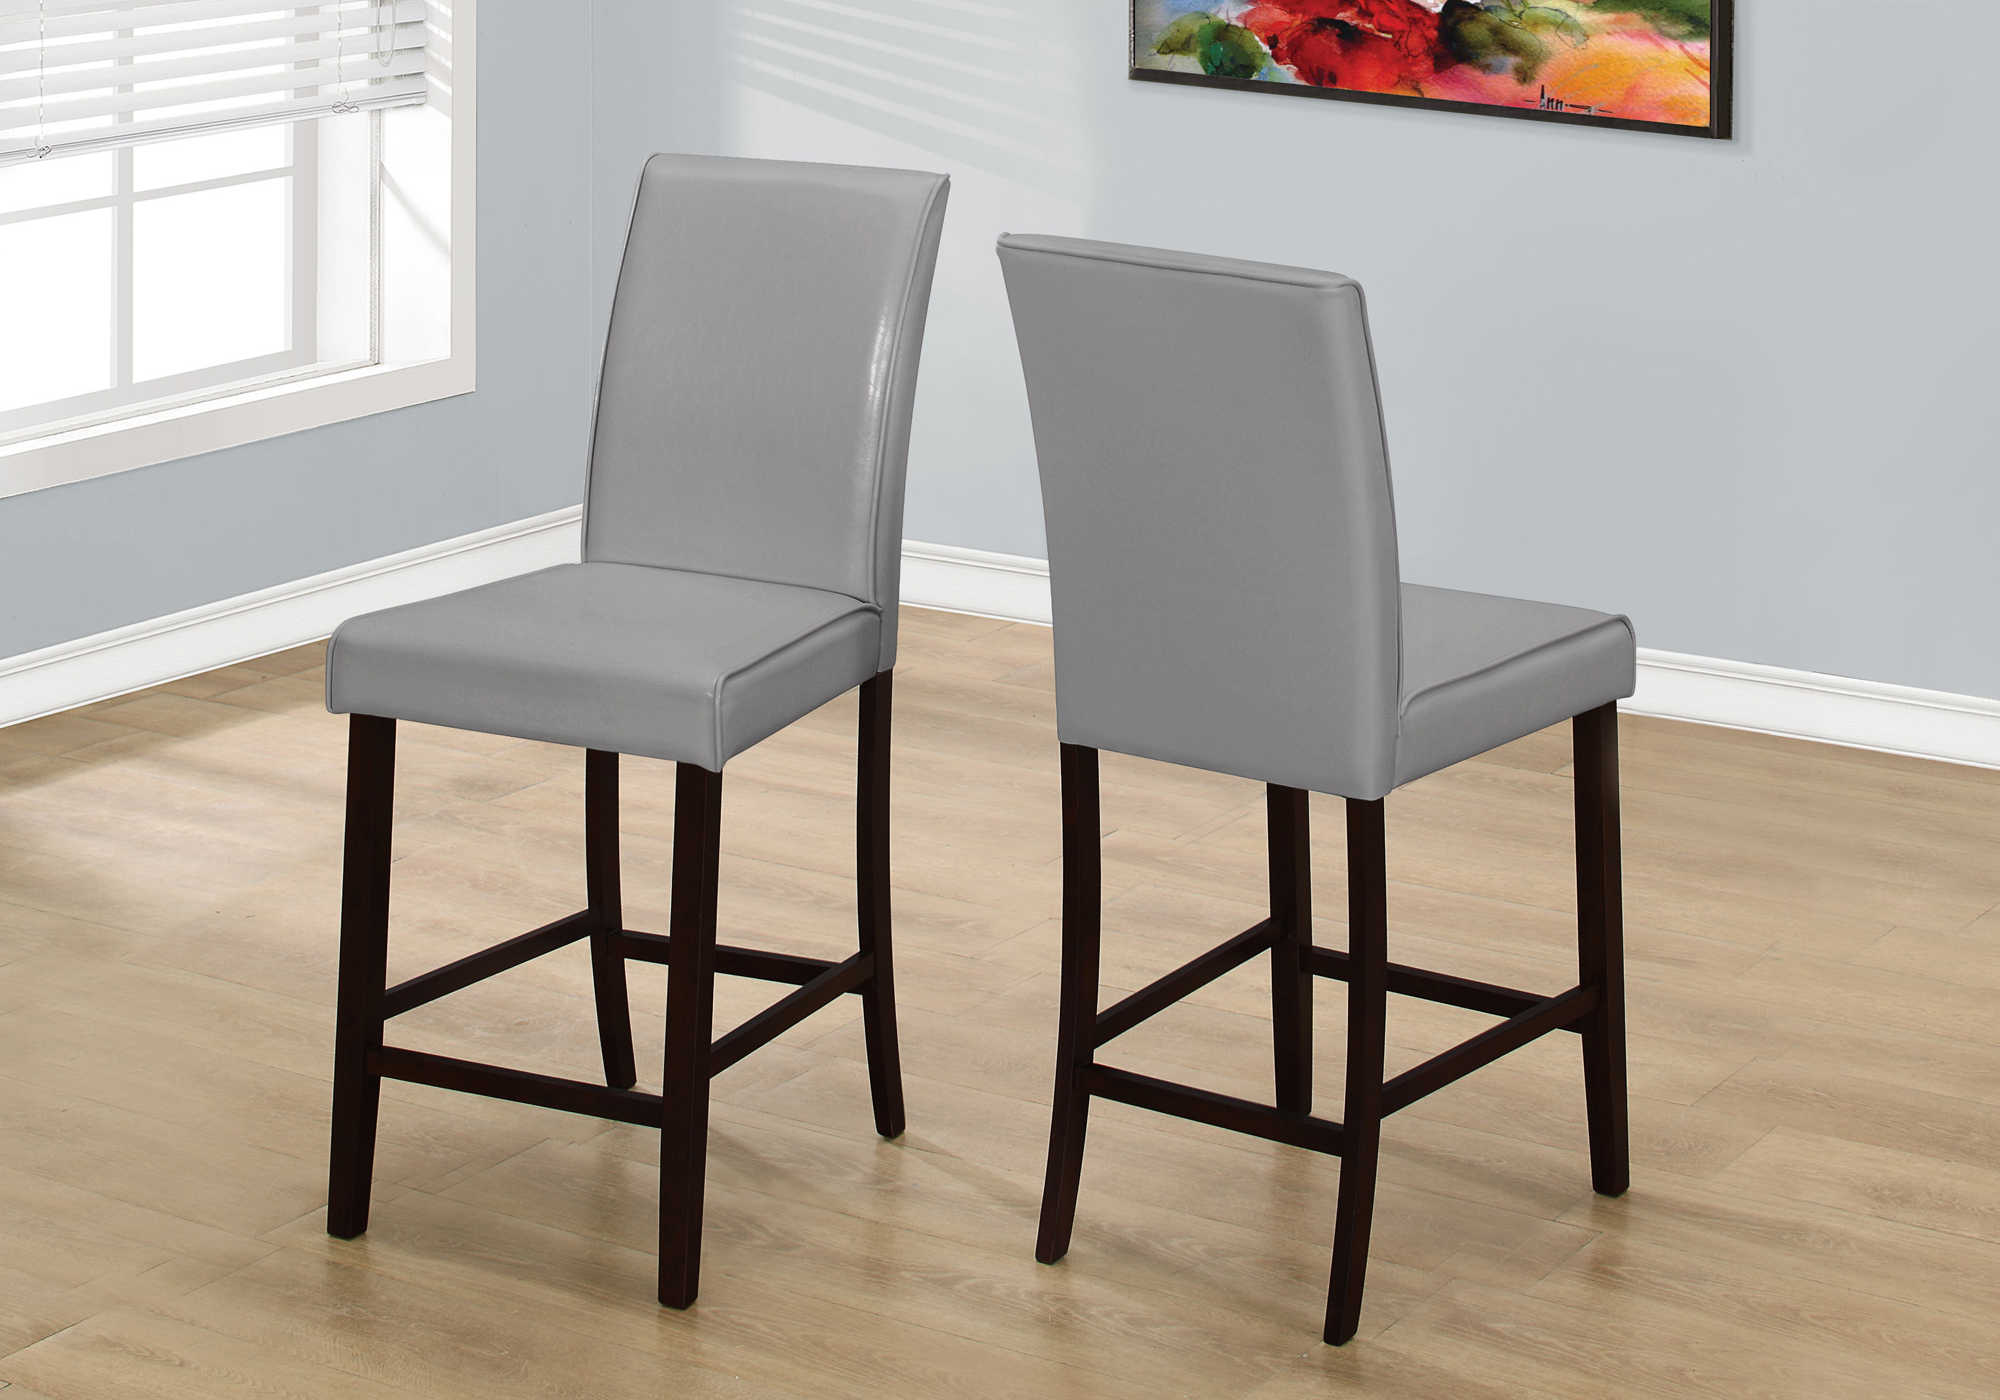 DINING CHAIR - 2PCS / GREY LEATHER-LOOK COUNTER HEIGHT